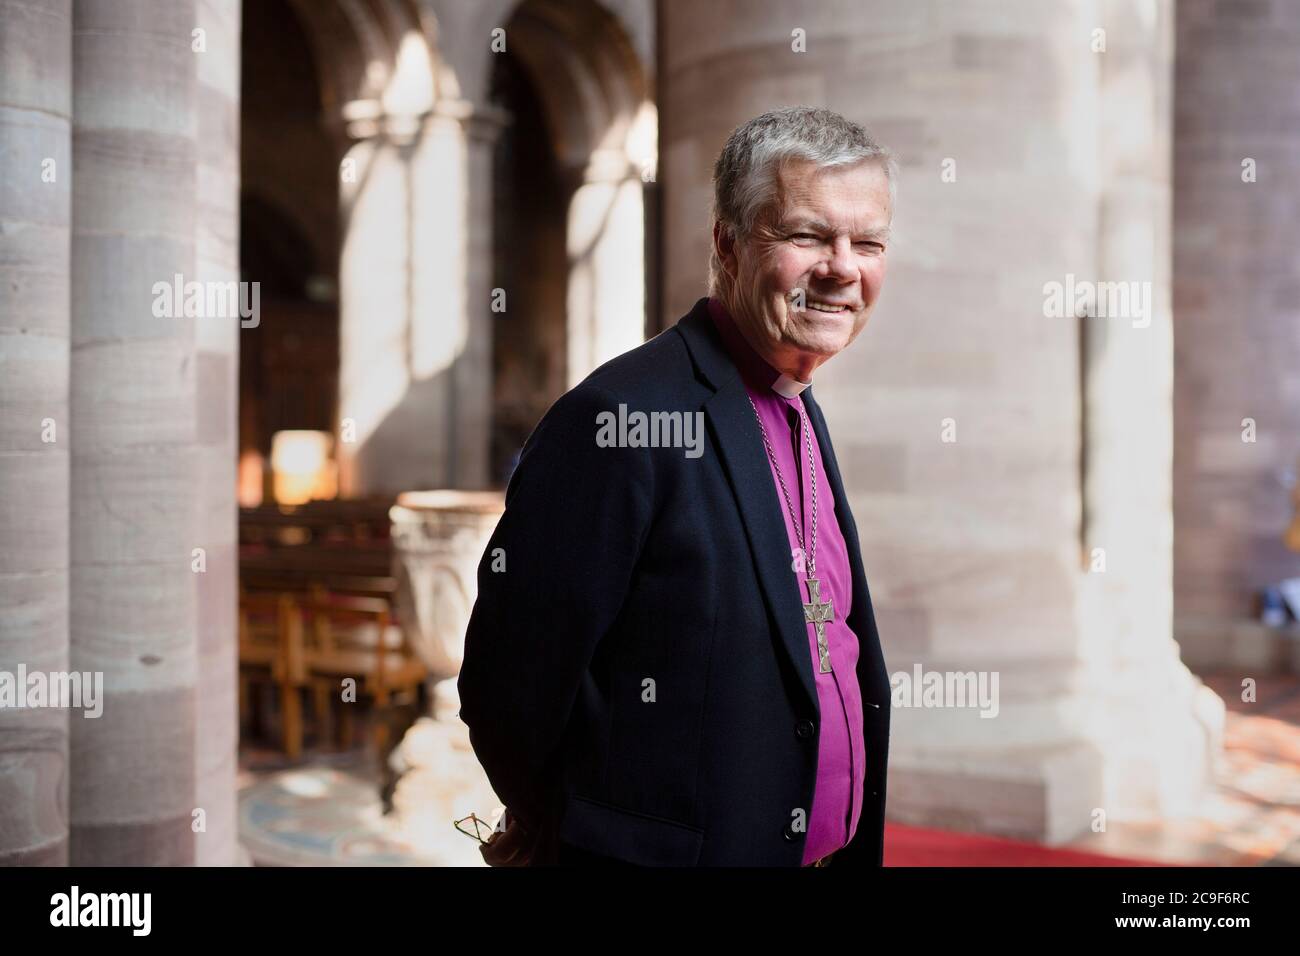 Vennture Hereford. The Right Reverend Richard Frith, Bishop of Hereford. Stock Photo